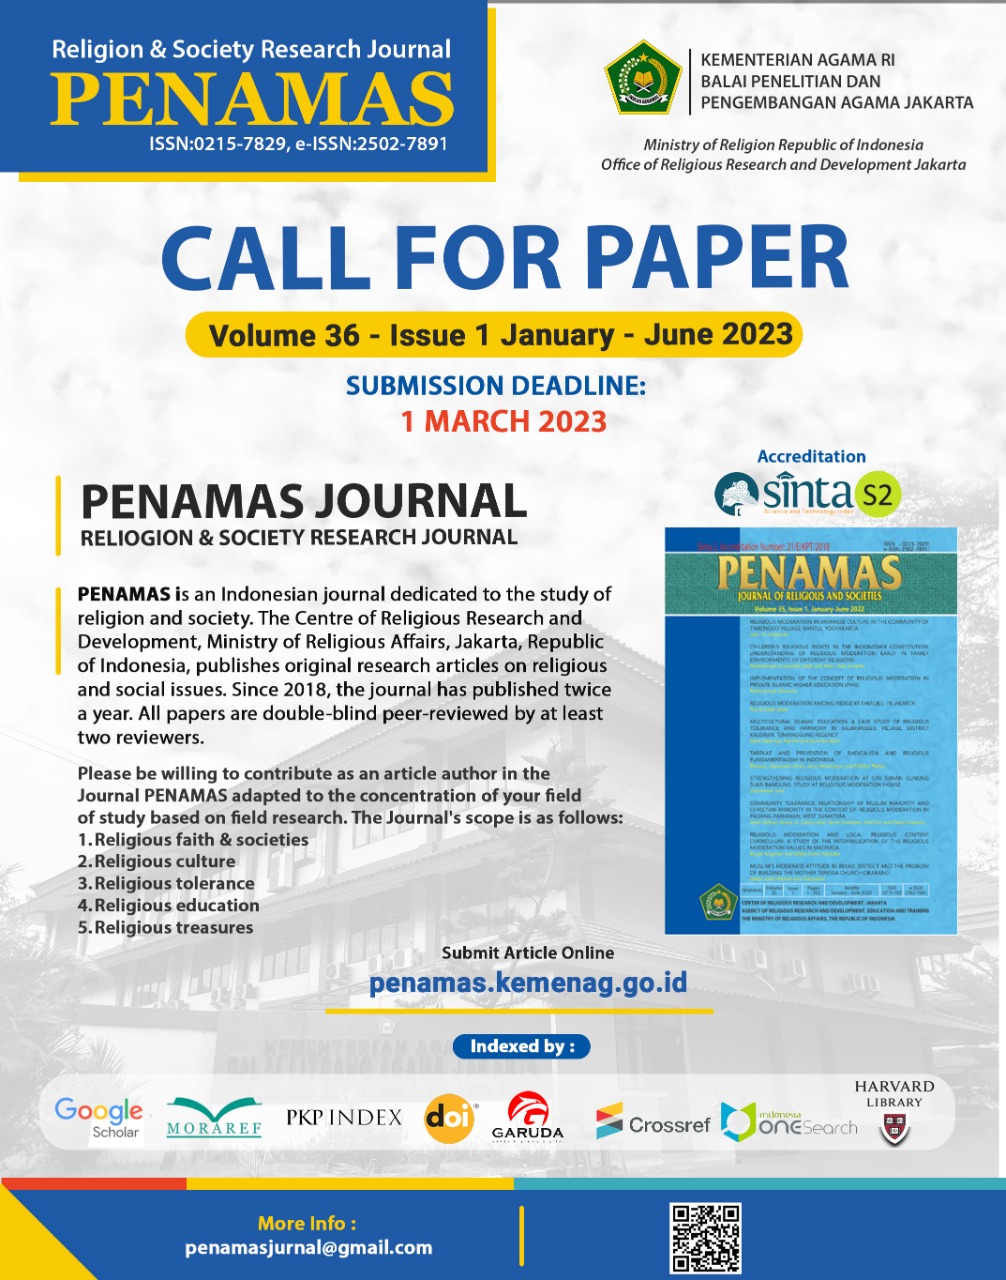 CALL FOR PAPER PENAMAS : Religion & Society Research Journal Volume 36, Issue 1 January-June 2023